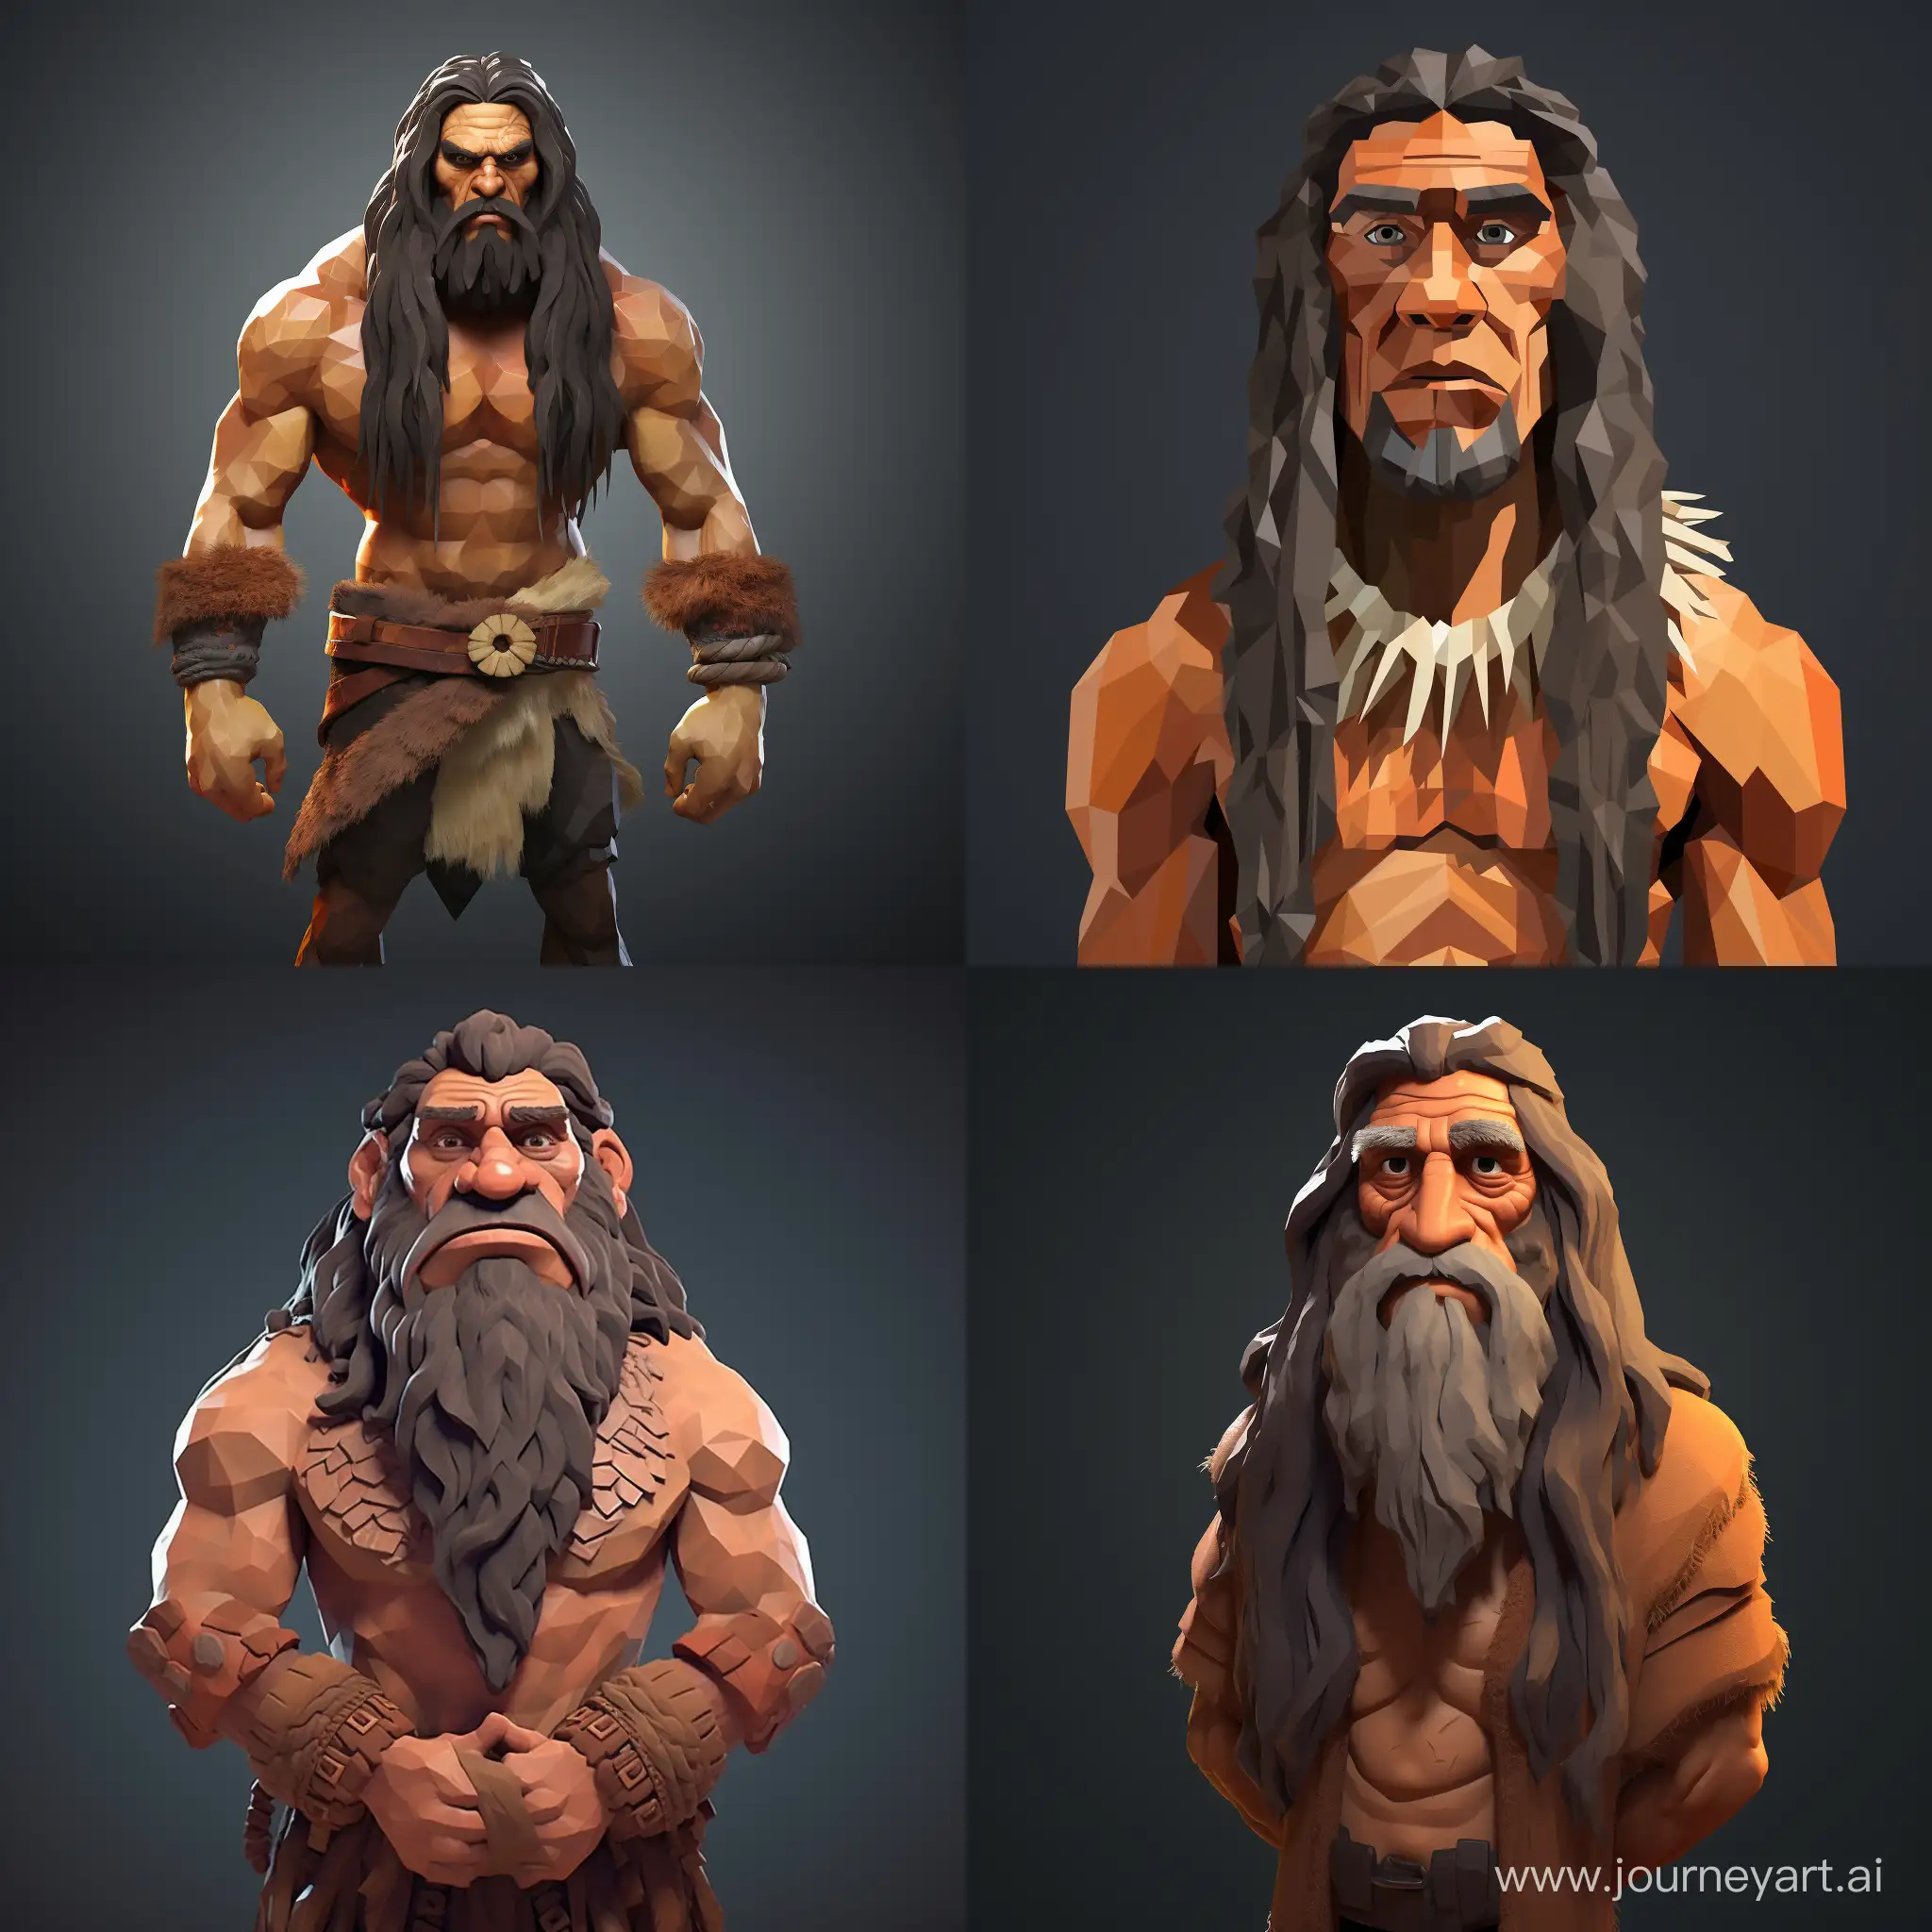 low poly neanderthal model for game avatar